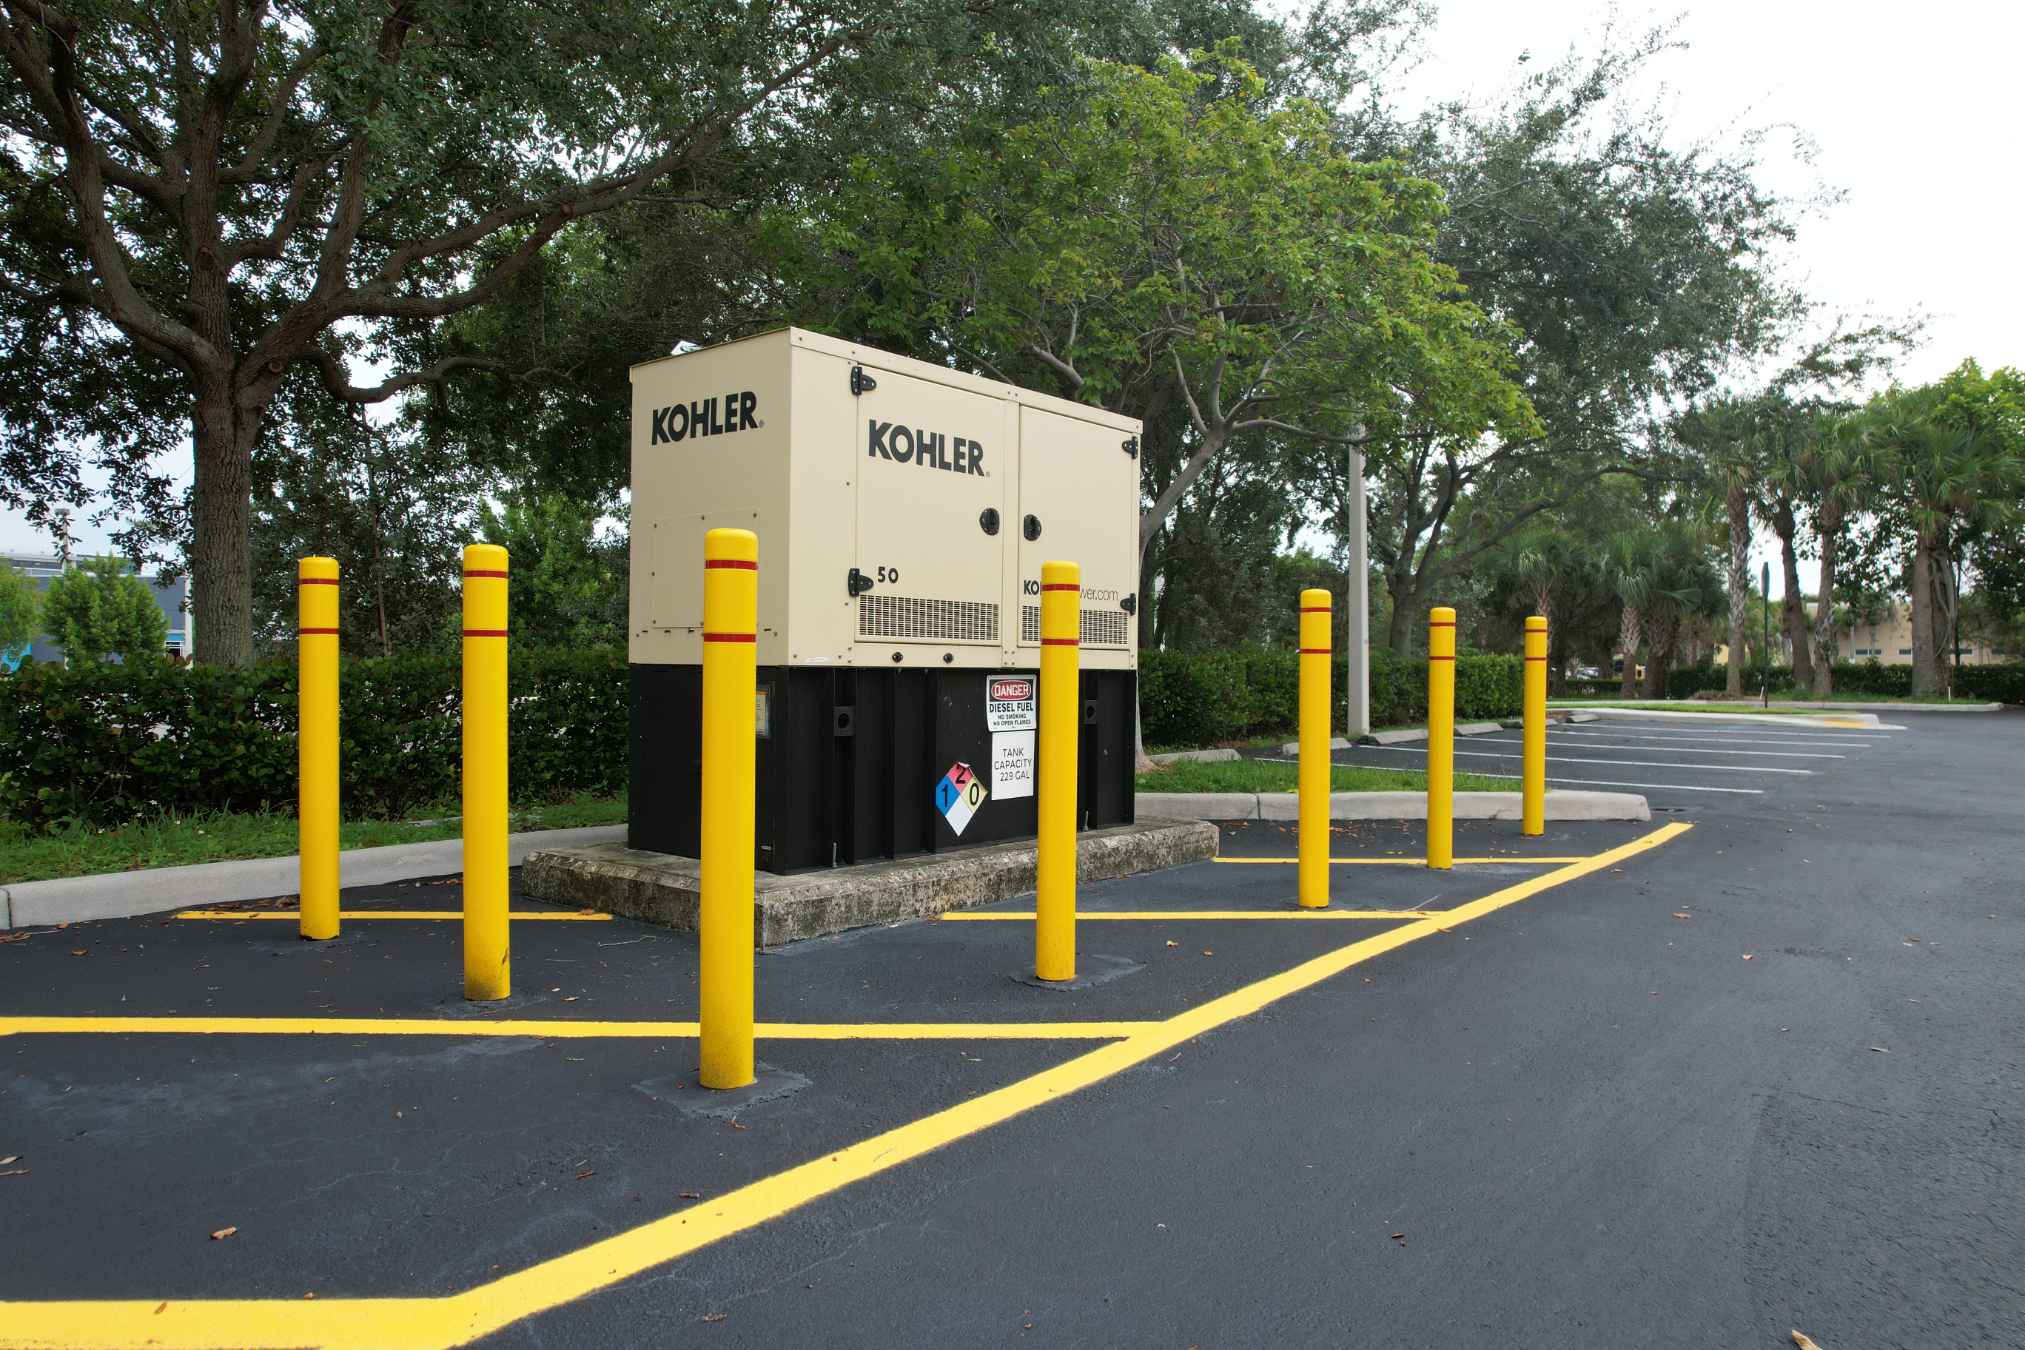 Bollard installation is a matter of safety and the experts at 3-D Paving in Coral Springs have decades of experience3 installing bollards and other parking lot fixtures. 3-D Paving is based in Coral Springs FL.